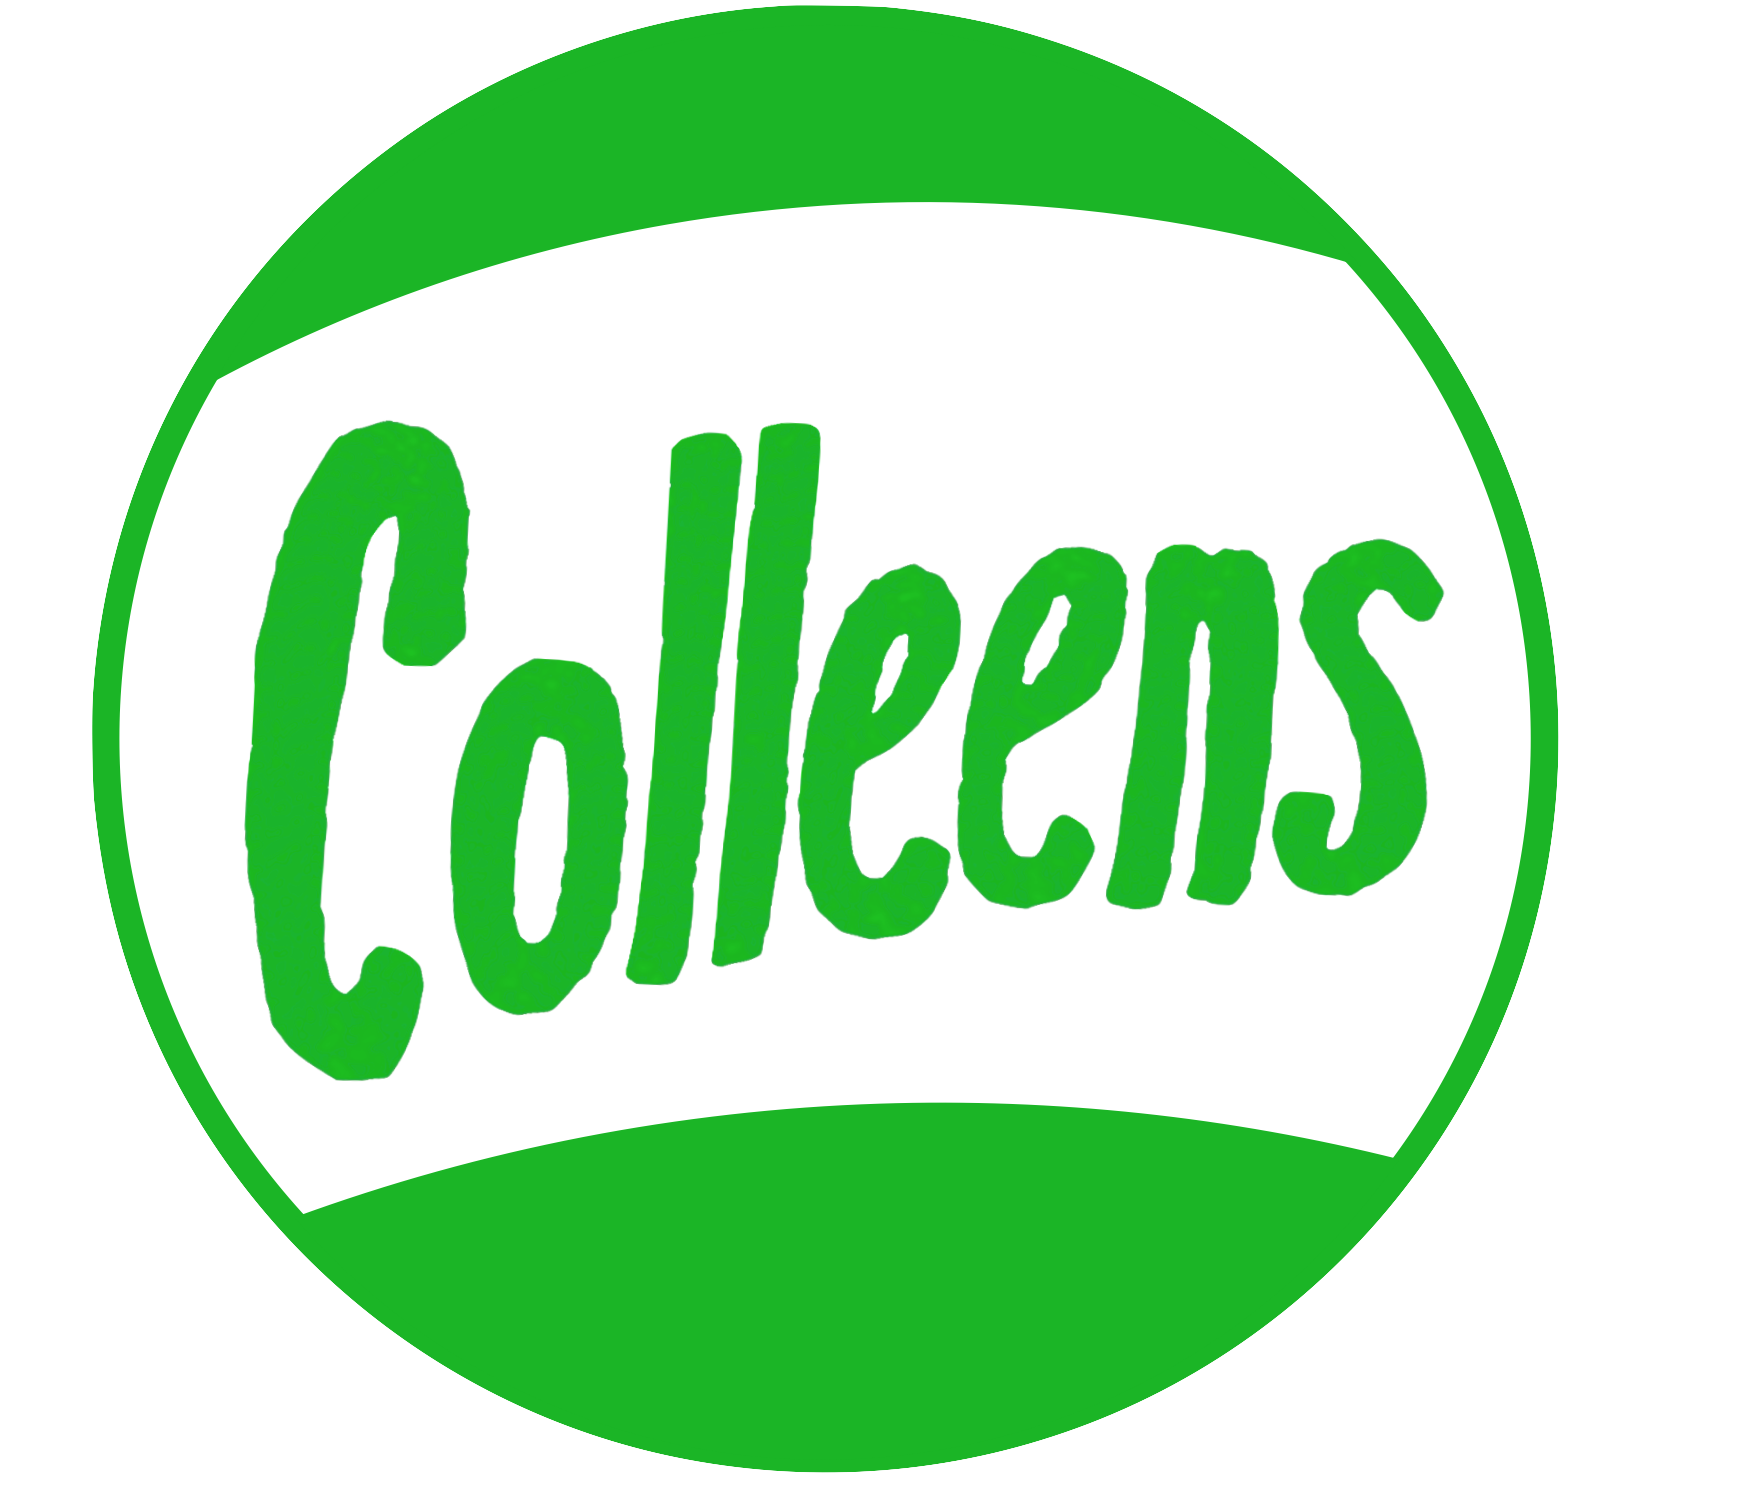 The Chicago Colleens